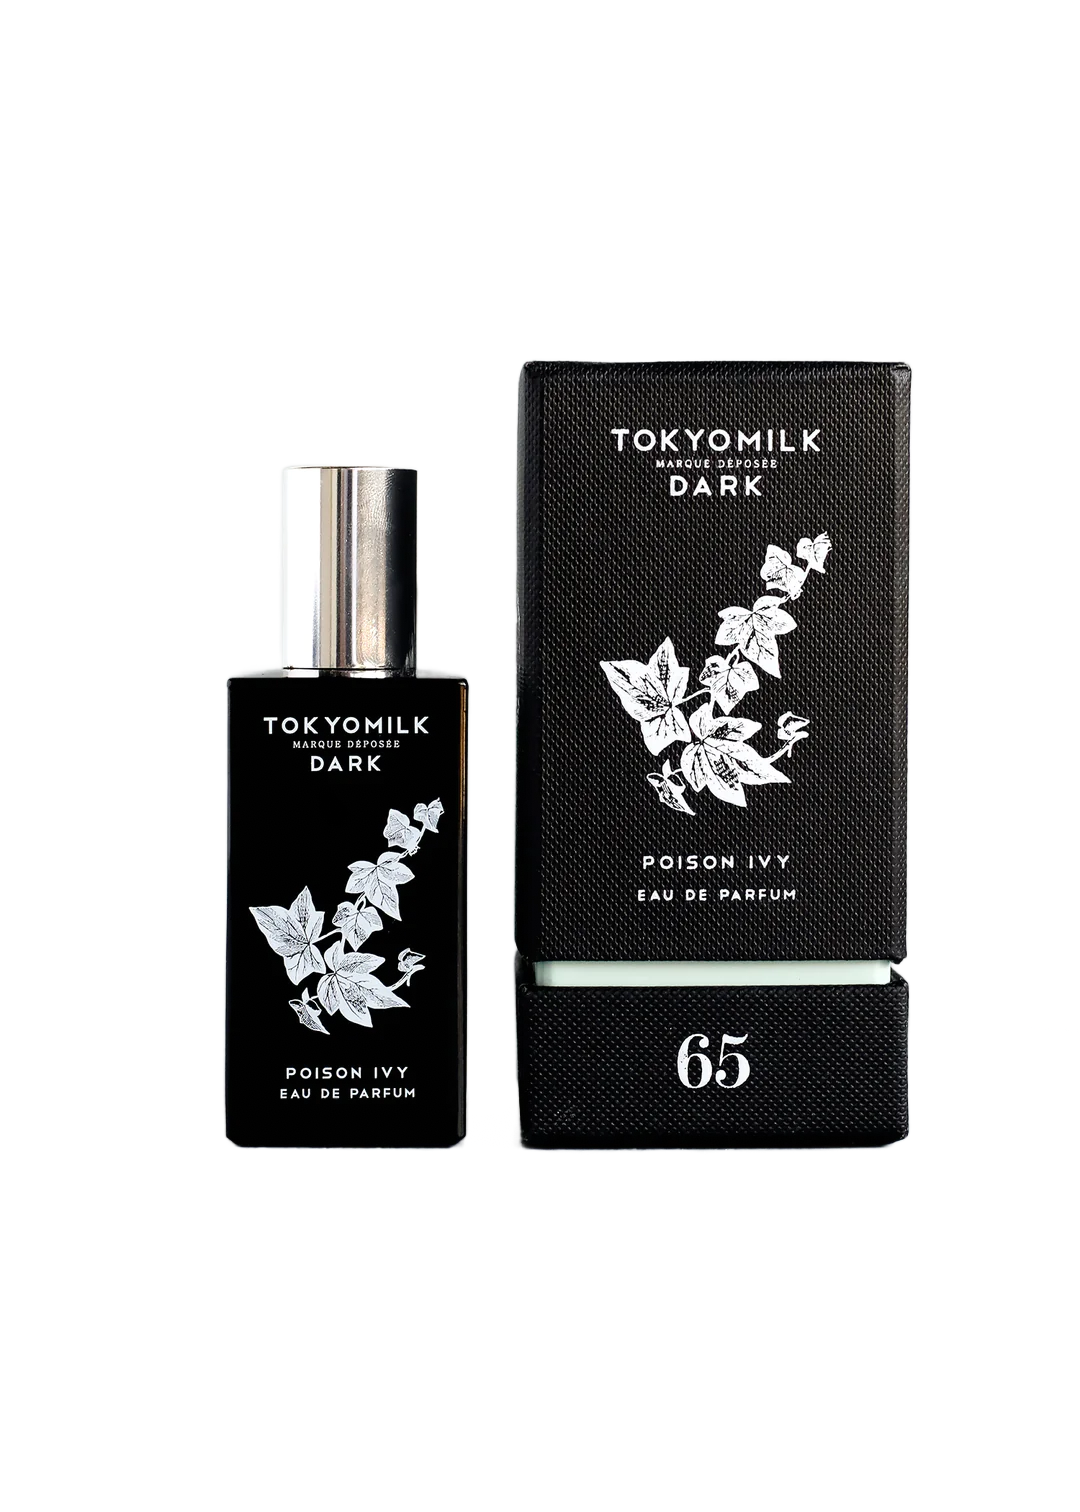 A bottle and packaging of Margot Elena TokyoMilk Dark Poison Ivy No. 65 Eau de Parfum. The bottle is black with white floral illustrations, and the packaging features a similar design with Eden Rose and the.